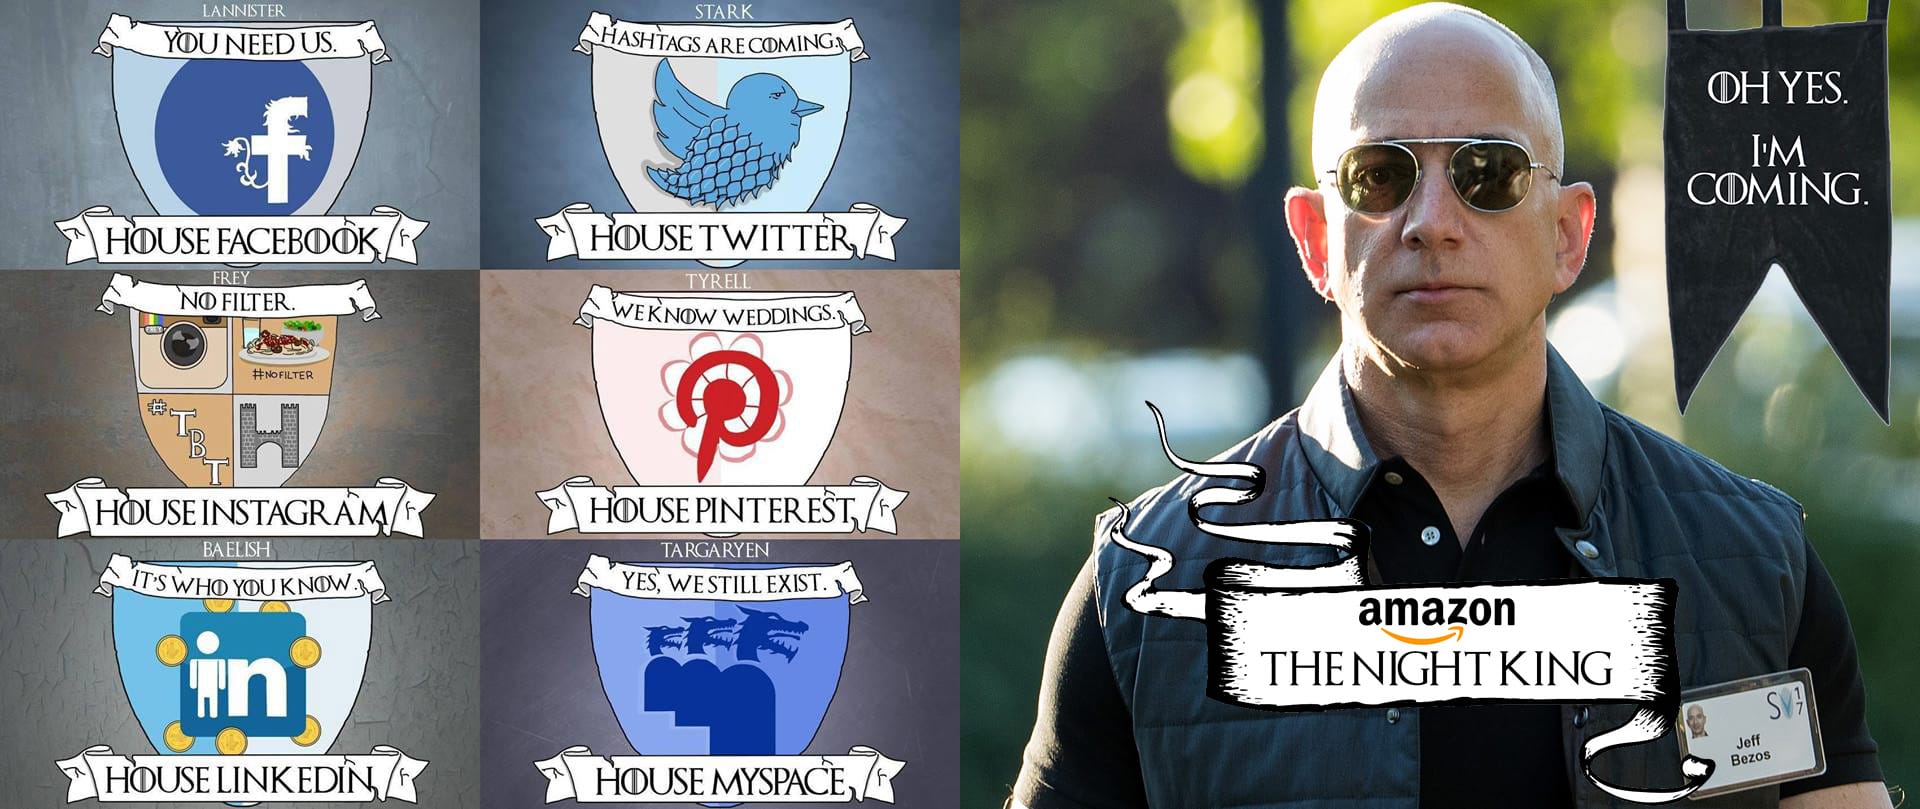 If social media hade been Game of Thrones